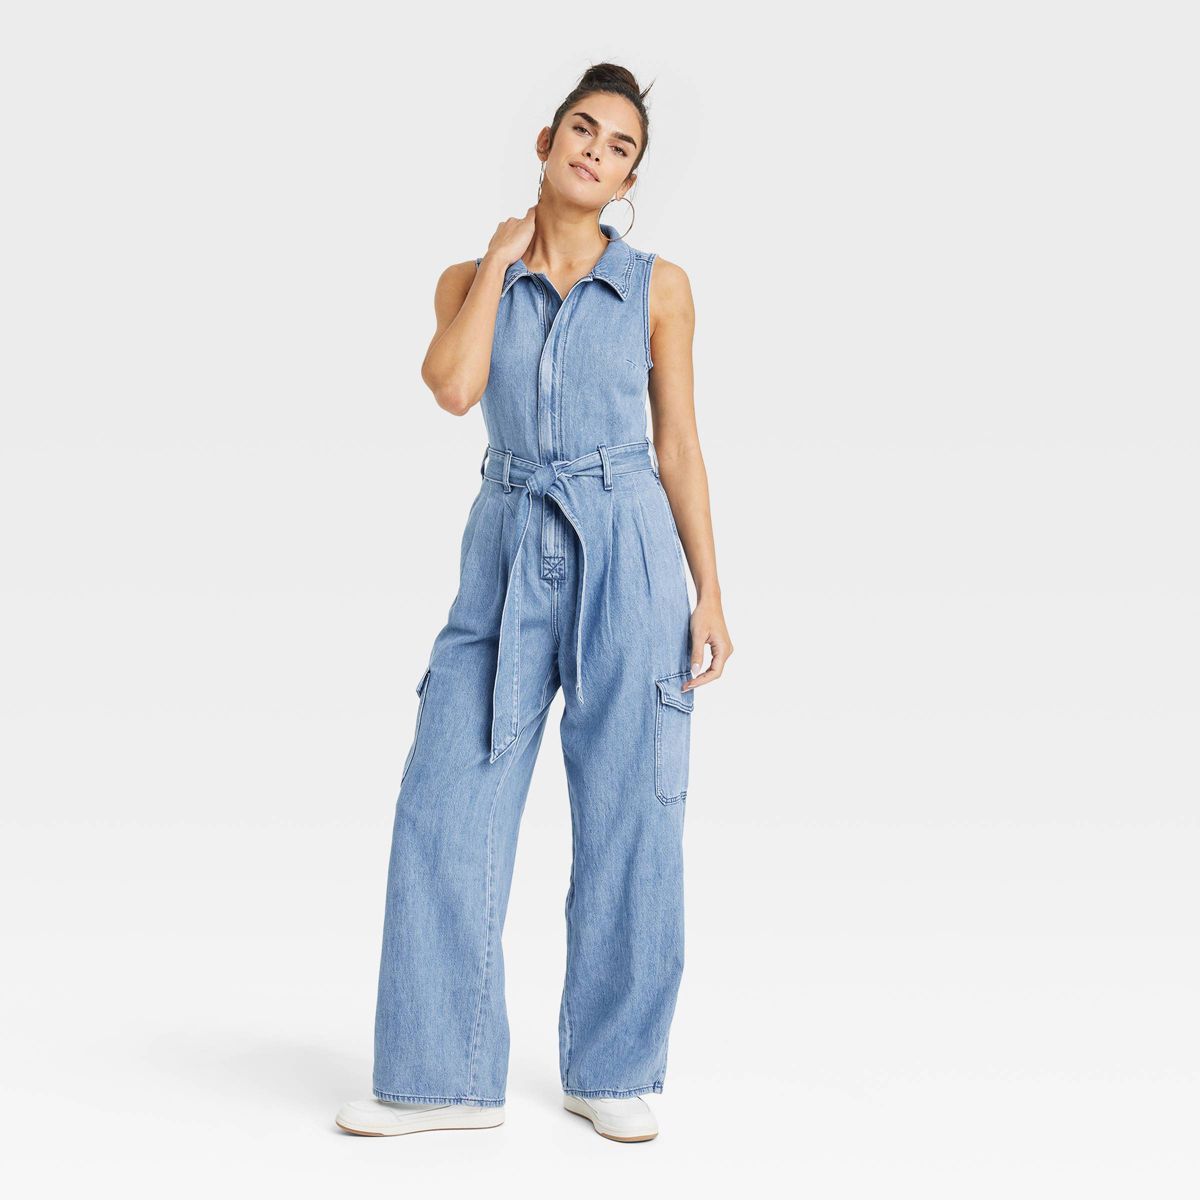 TargetClothing, Shoes & AccessoriesWomen’s ClothingJumpsuits & RompersShop all Universal Thread... | Target